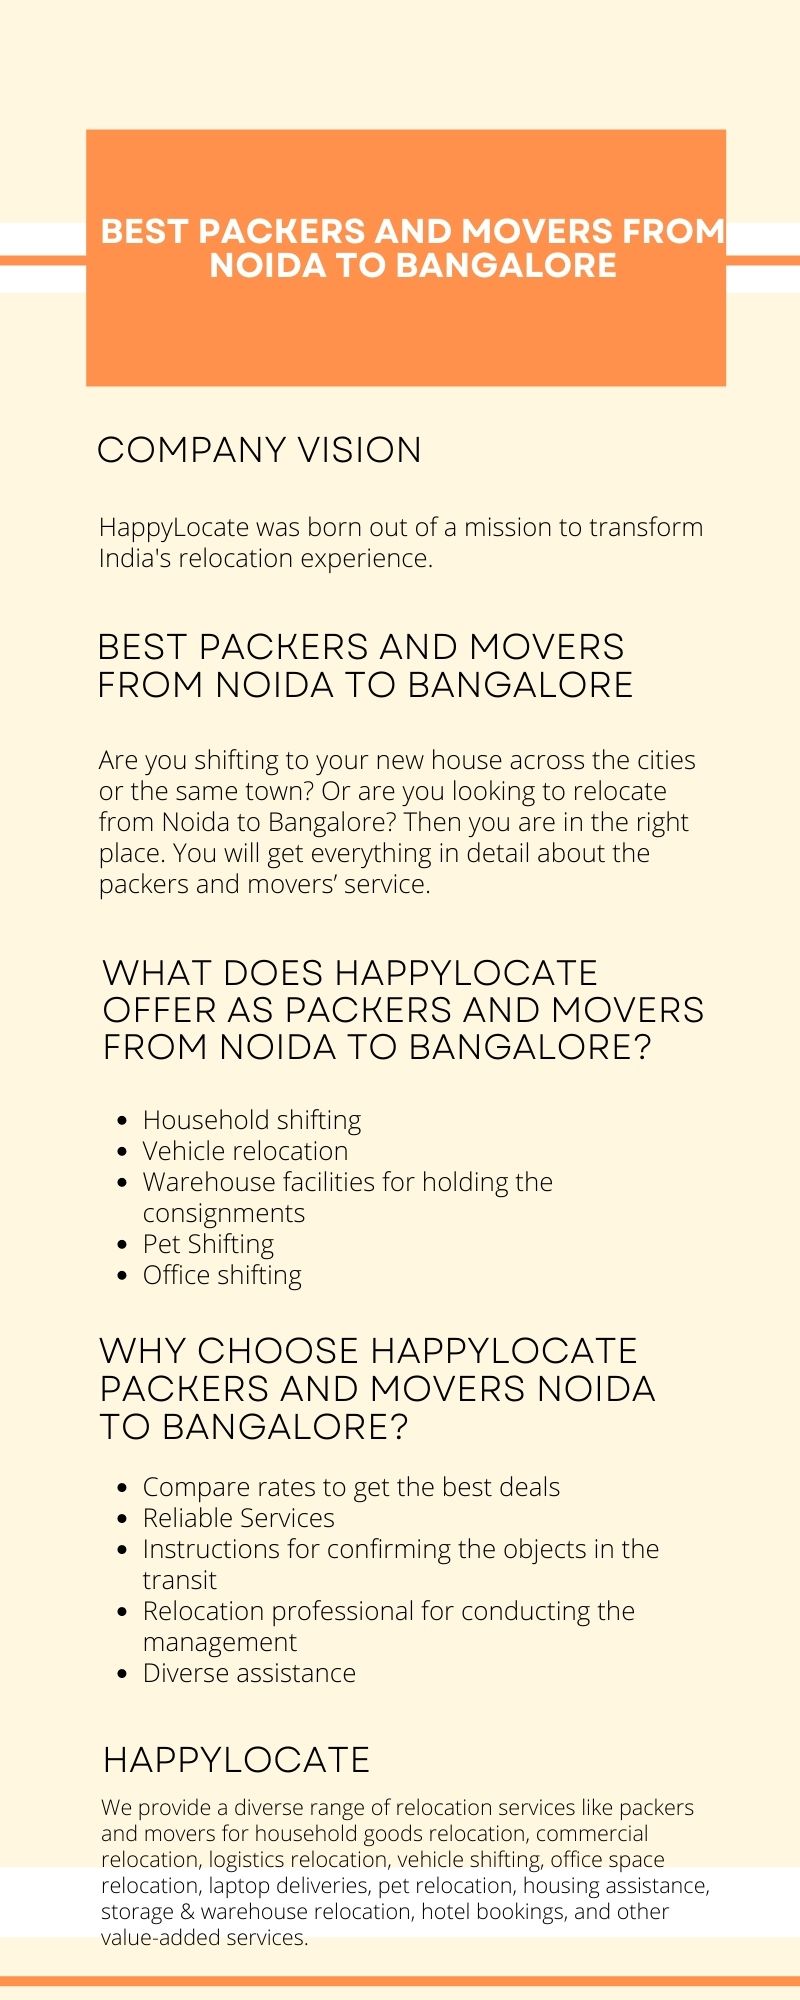 BEST PACKERS AND MOVERS FROM

NOIDA TO BANGALORE

 

COMPANY VISION

HappyLocate was born out of a mission to transform
India's relocation experience.

BEST PACKERS AND MOVERS
FROM NOIDA TO BANGALORE

Are you shifting to your new house across the cities
or the same town? Or are you looking to relocate
from Noida to Bangalore? Then you are in the right
place. You will get everything in detail about the
packers and movers’ service

WHAT DOES HAPPYLOCATE
OFFER AS PACKERS AND MOVERS
FROM NOIDA TO BANGALORE?

* Household shifting

e Vehicle relocation

* Warehouse facilities for holding the
consignments

o Pet Shifting

Office shifting

WHY CHOOSE HAPPYLOCATE
PACKERS AND MOVERS NOIDA
TO BANGALORE?

e Compare rates to get the best deals

e Reliable Services

e Instructions for confirming the objects in the
transit

o Relocation professional for conducting the
management

* Diverse assistance

HAPPYLOCATE

We provide a diverse range of relocation services | <e packers

    
  

, logistics relocation, vehicle shift ng, office s
relocation, laptop deliveries, pet relocat.on, housing
storage & warencuse re ocation, ~otel nookings, and other
val.e-addea services.